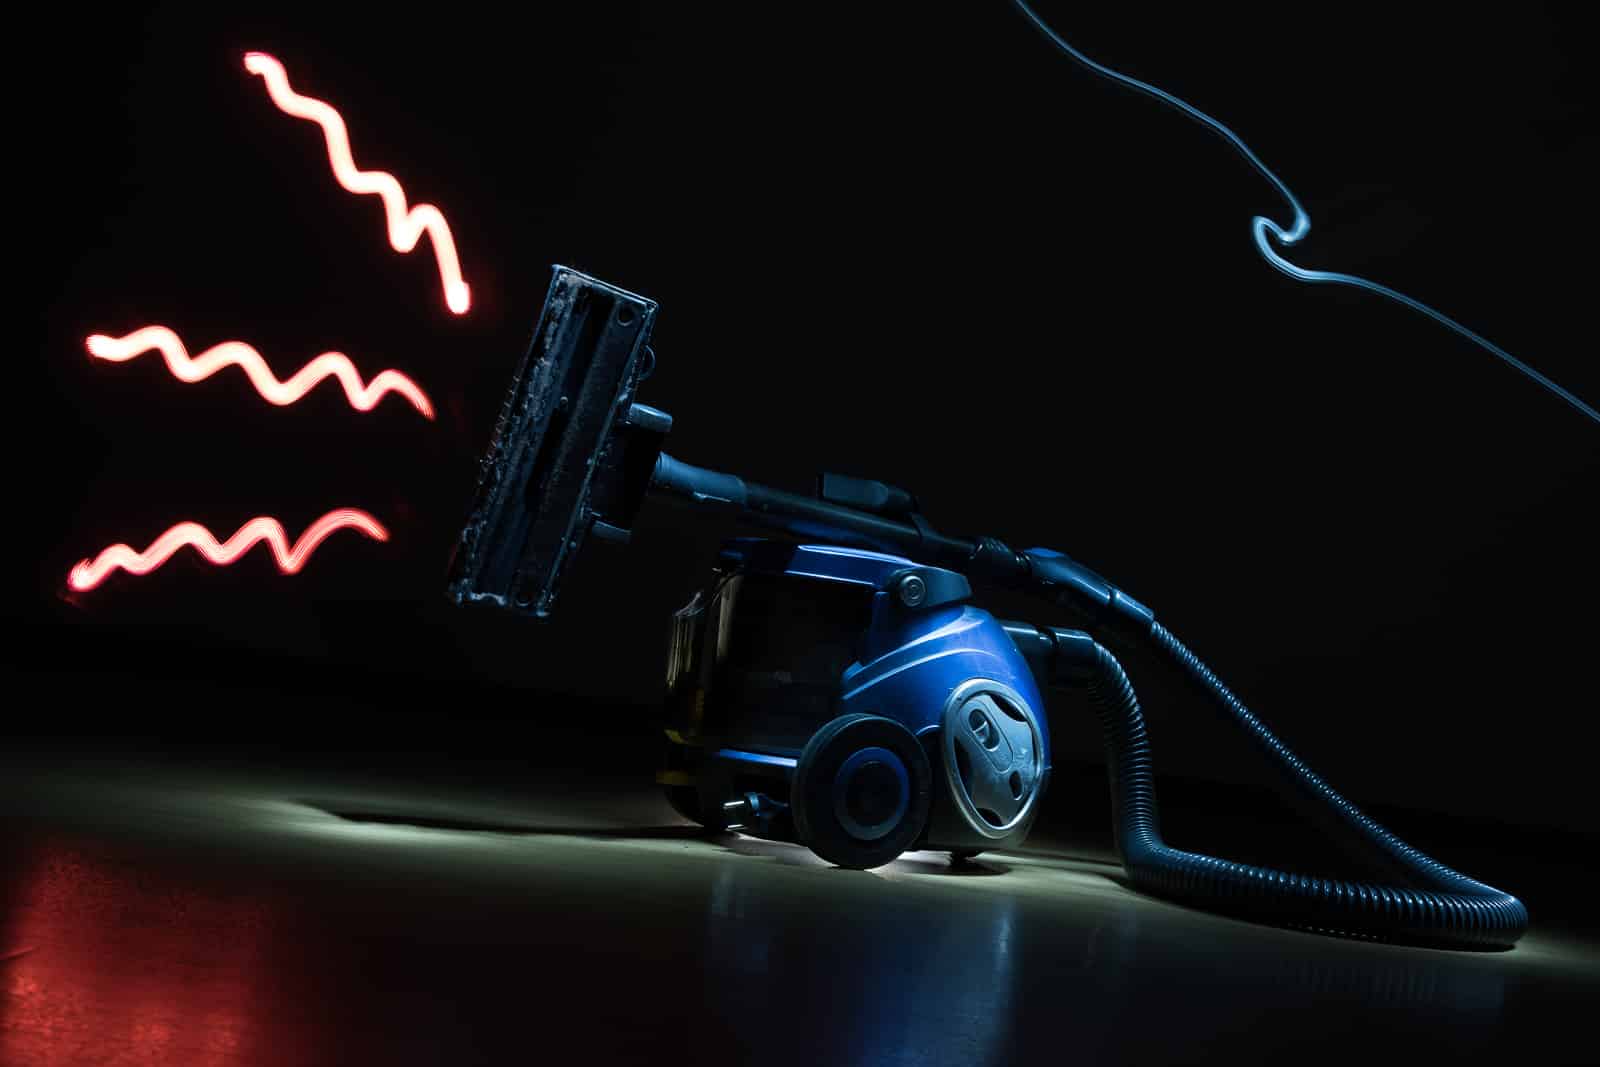 Light Painting: How to Do It and What You’ll Need